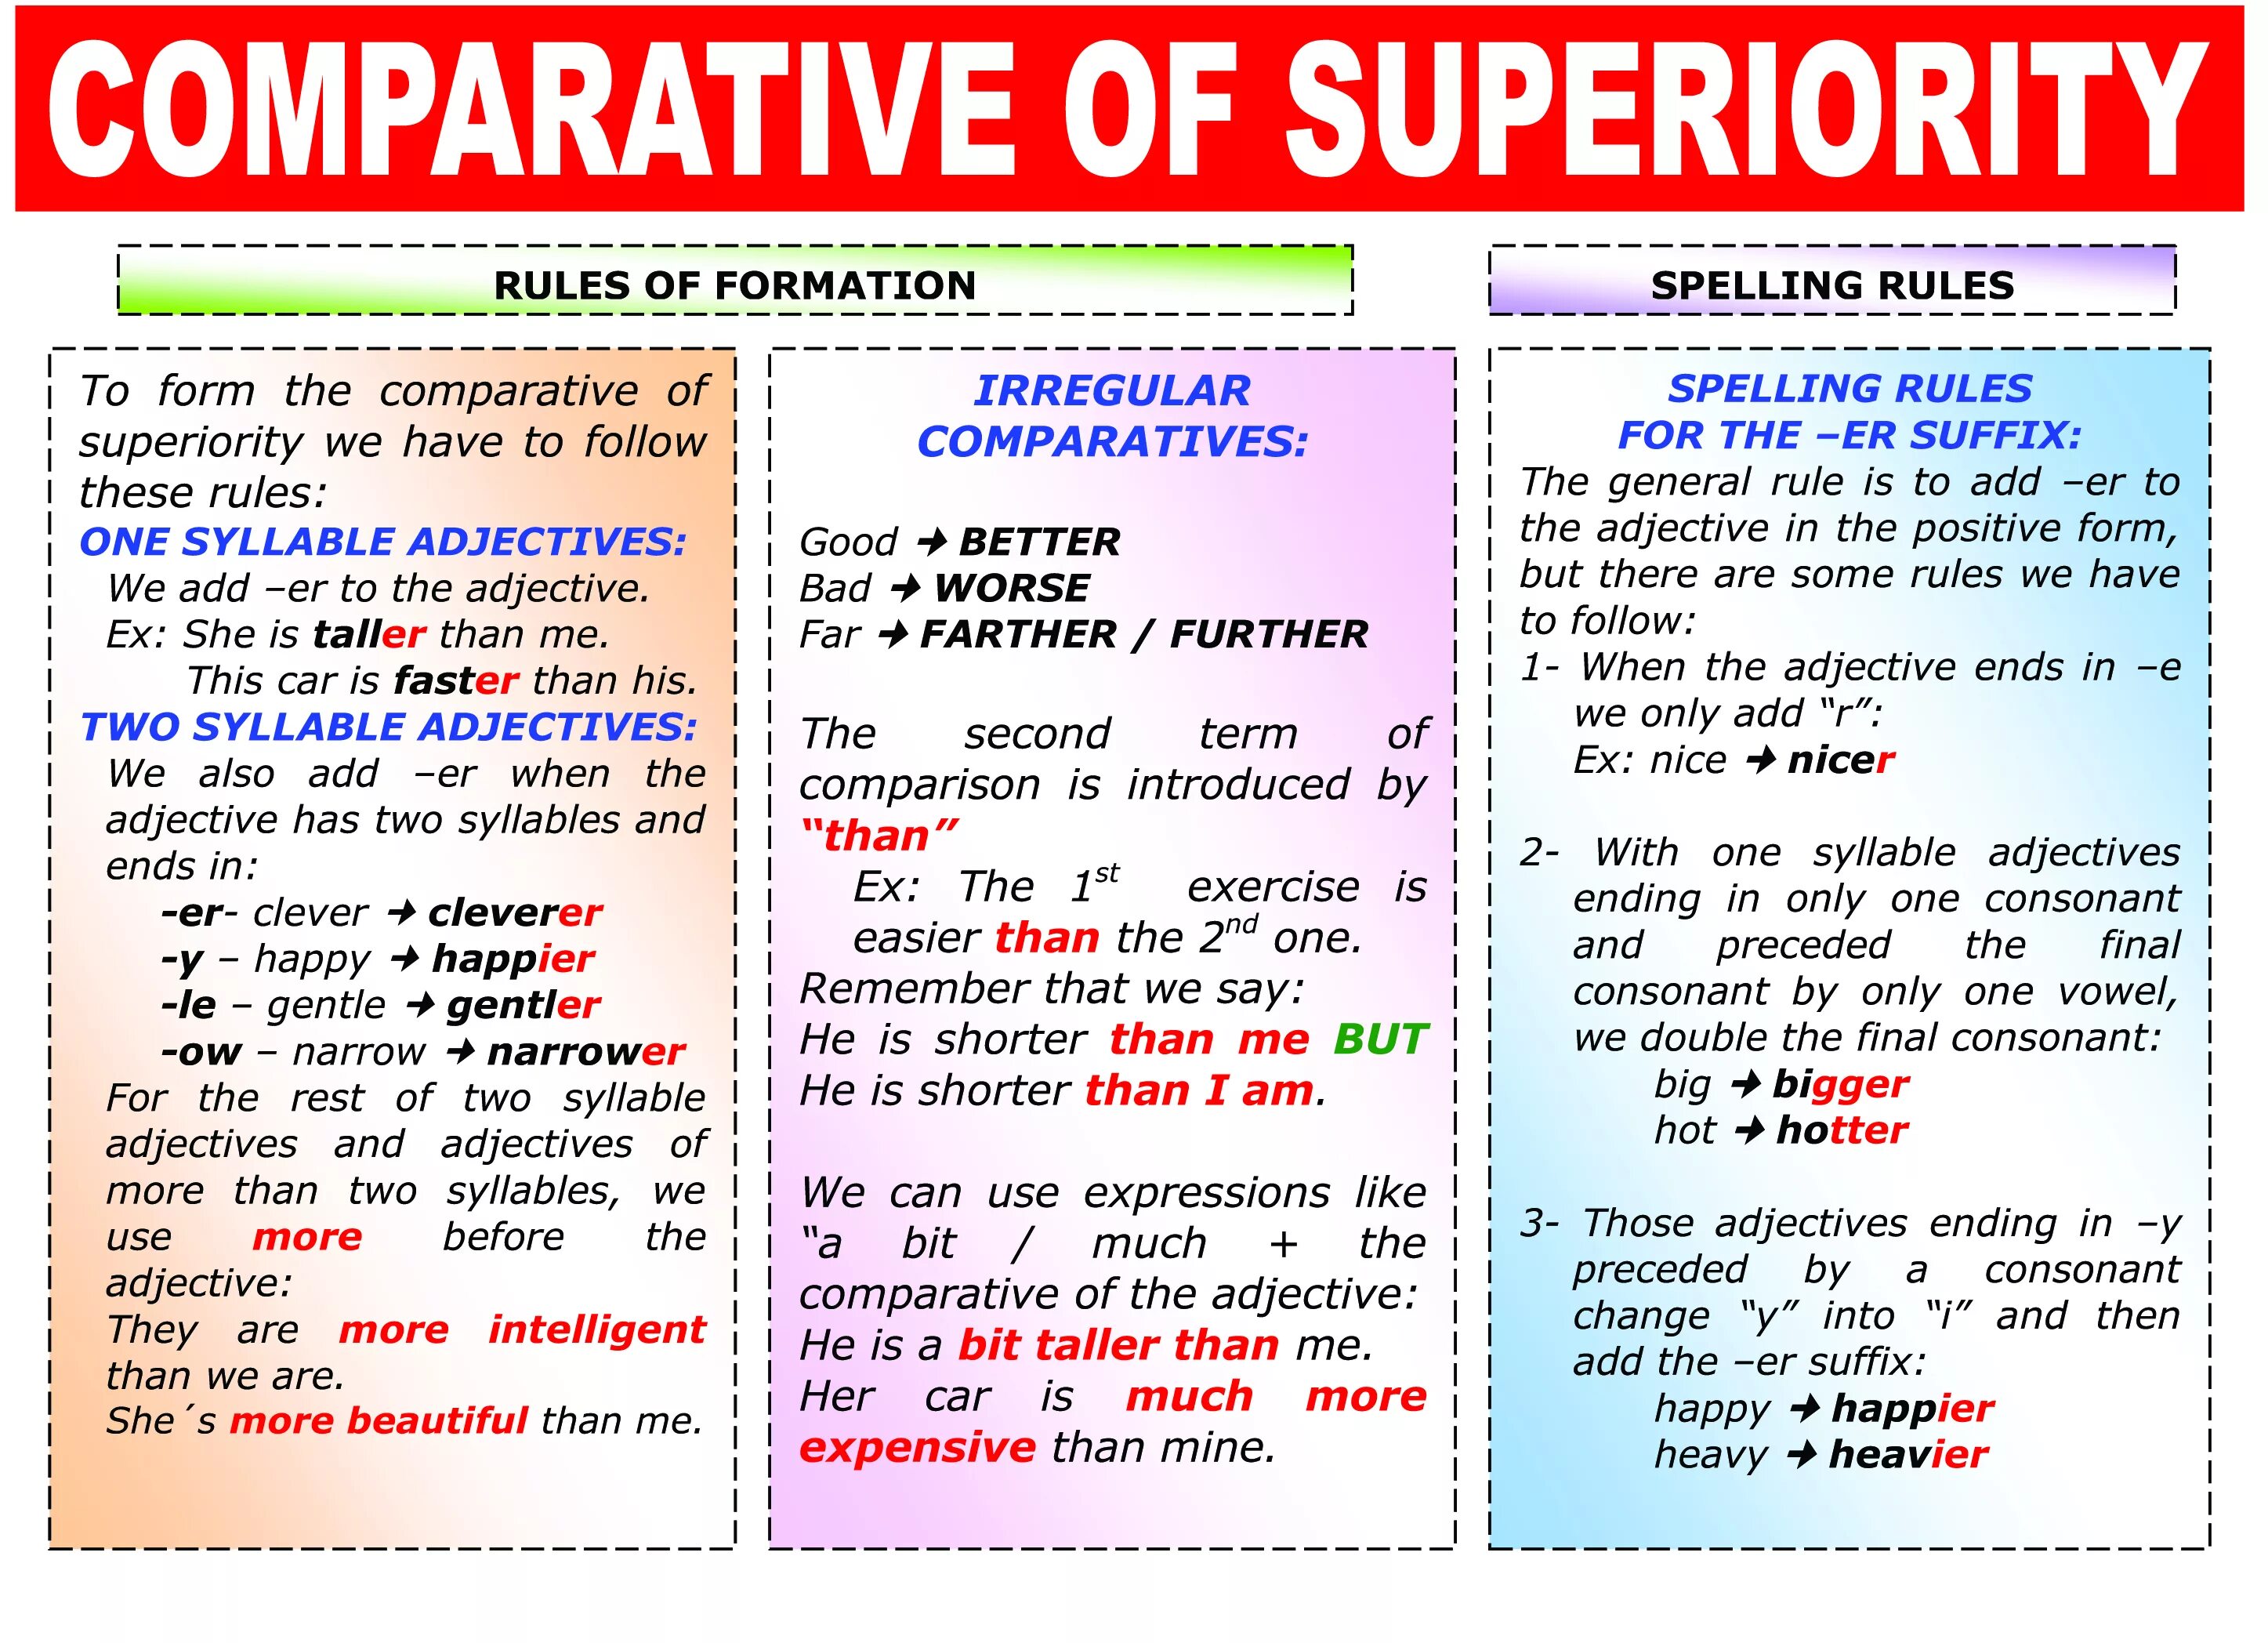 Comparative of superiority. Comparisons правило. Comparative adjectives Rule. Spelling Rules adjectives. Comparisons heavy